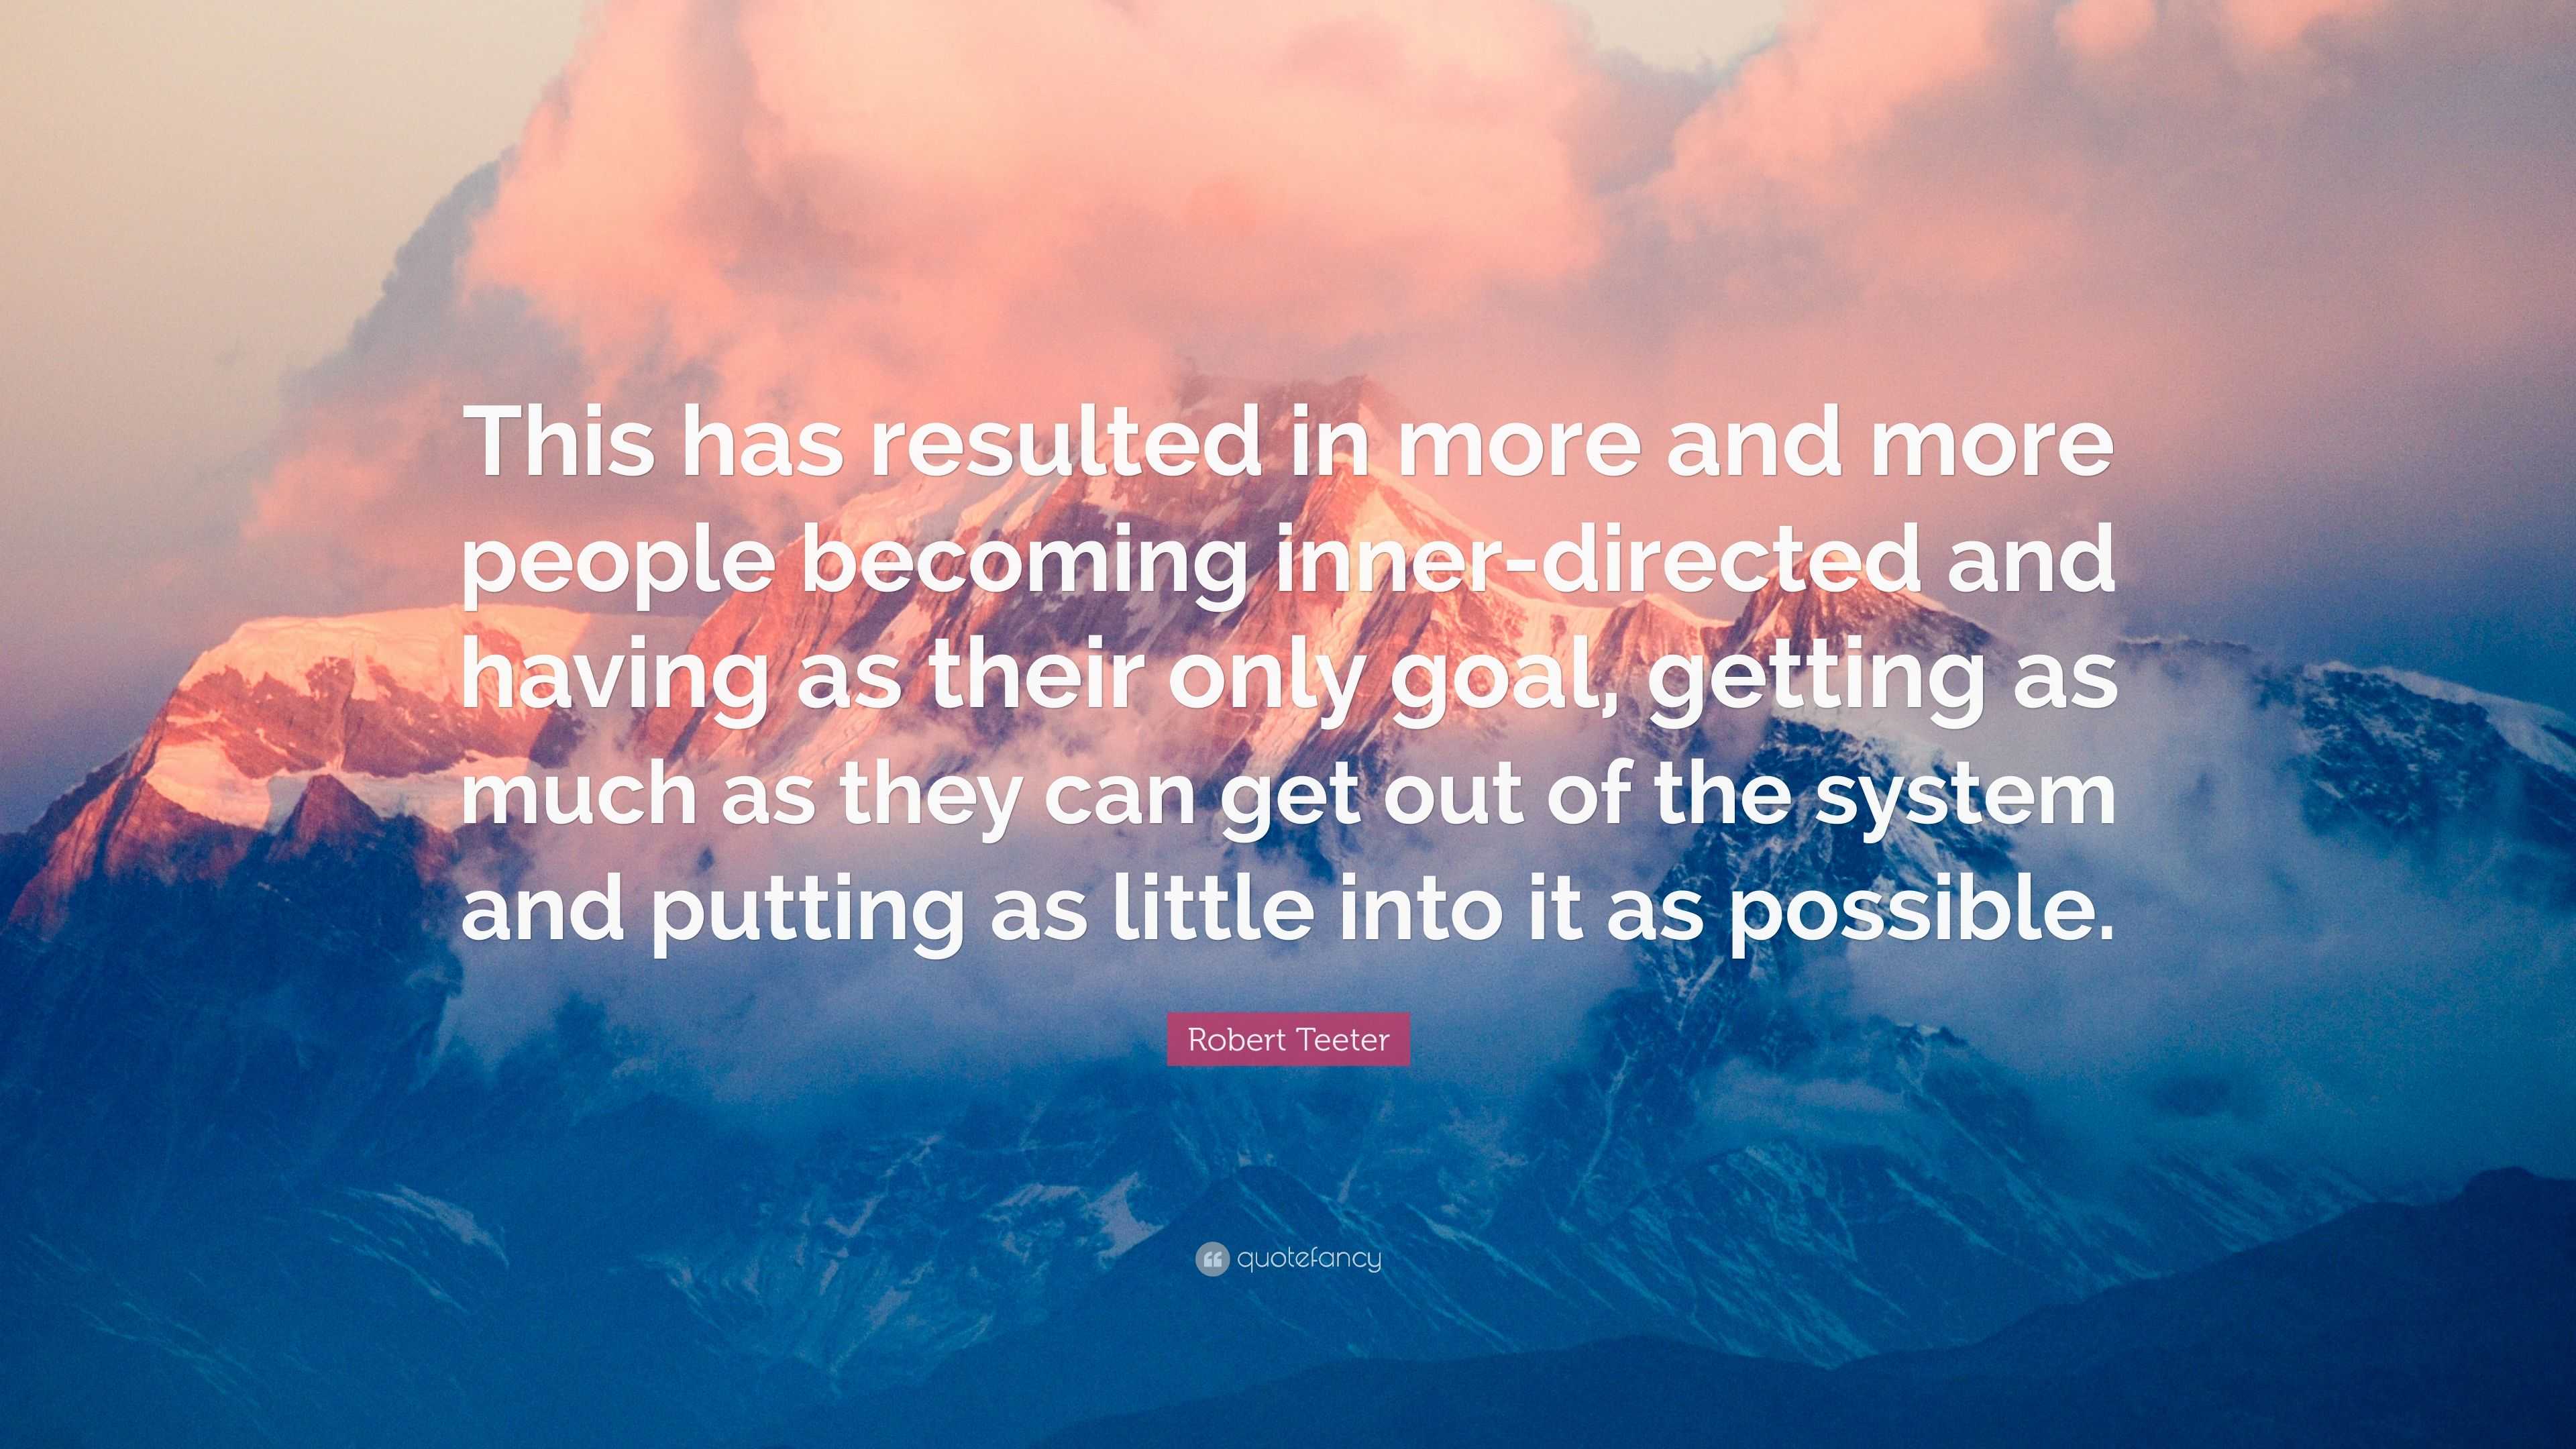 Robert Teeter Quote: “This has resulted in more and more people ...